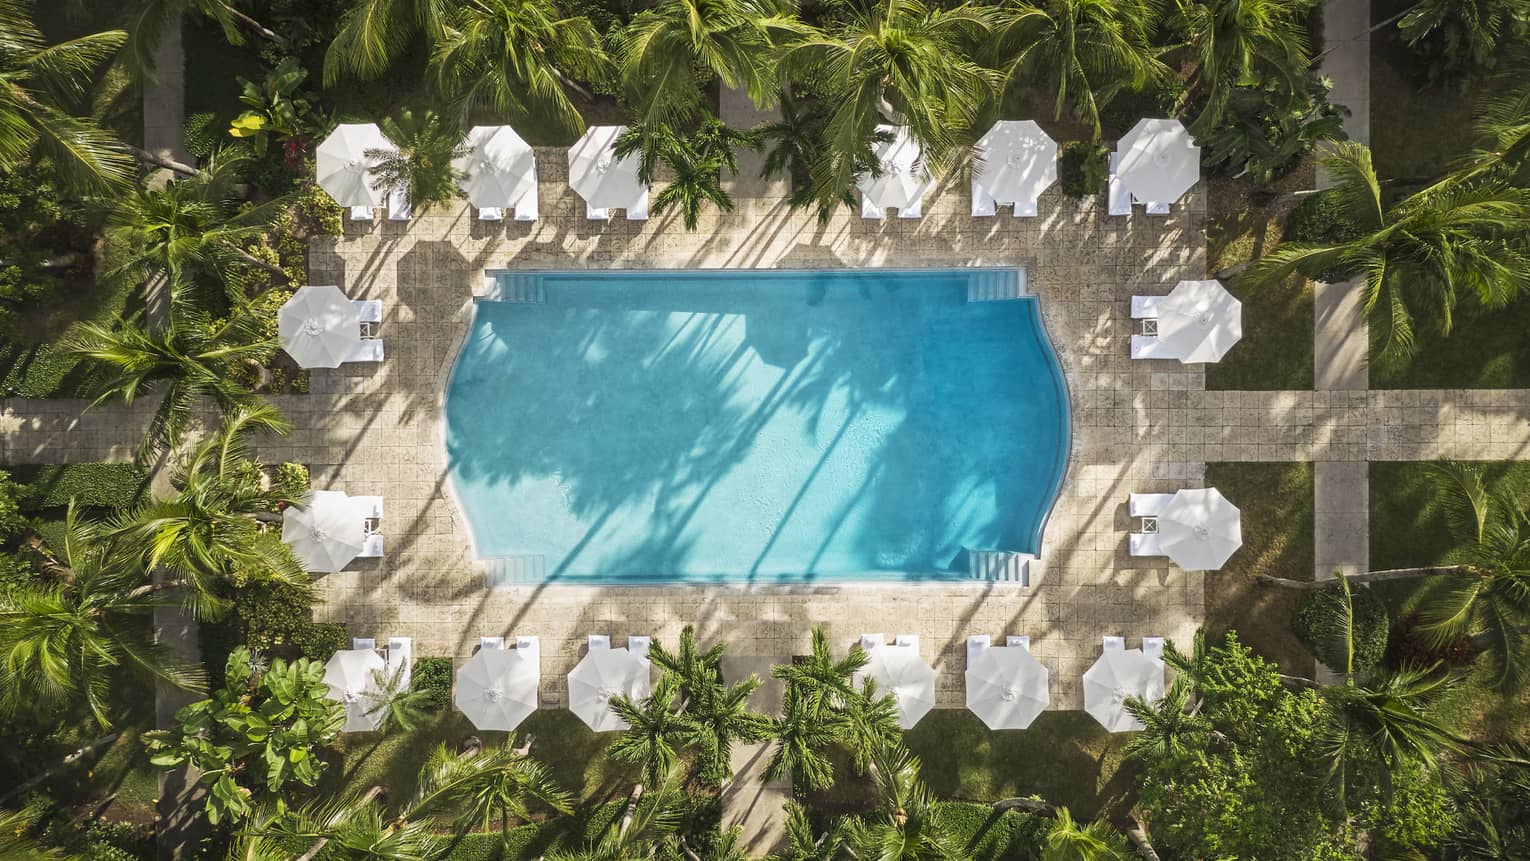 An aerial view of an outdoor pool surrounded by plants.